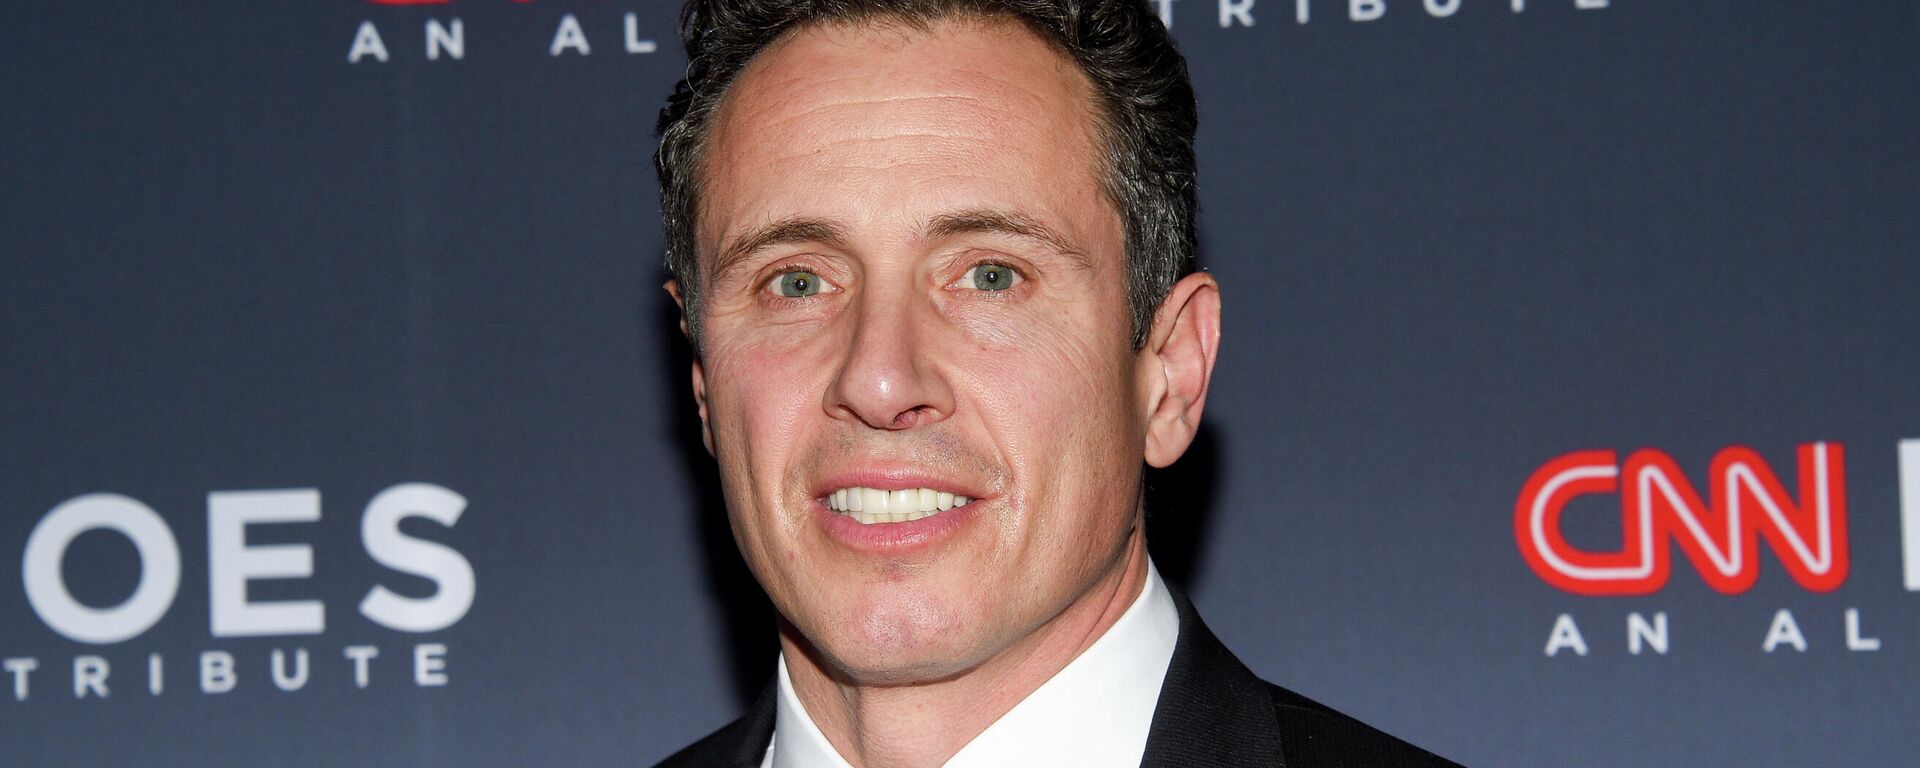 CNN anchor Chris Cuomo attends the 12th annual CNN Heroes: An All-Star Tribute at the American Museum of Natural History in New York. Cuomo has told viewers that he “tried to do the right thing” when balancing his role as a journalist and brother to outgoing New York Gov. Andrew Cuomo, who announced his resignation following allegations of sexual harassment. Chris Cuomo returned to the air Monday, Aug. 16, 2021, for the first time following his brother's announcement and addressed what has become an awkward issue for his employer. - Sputnik International, 1920, 05.02.2022